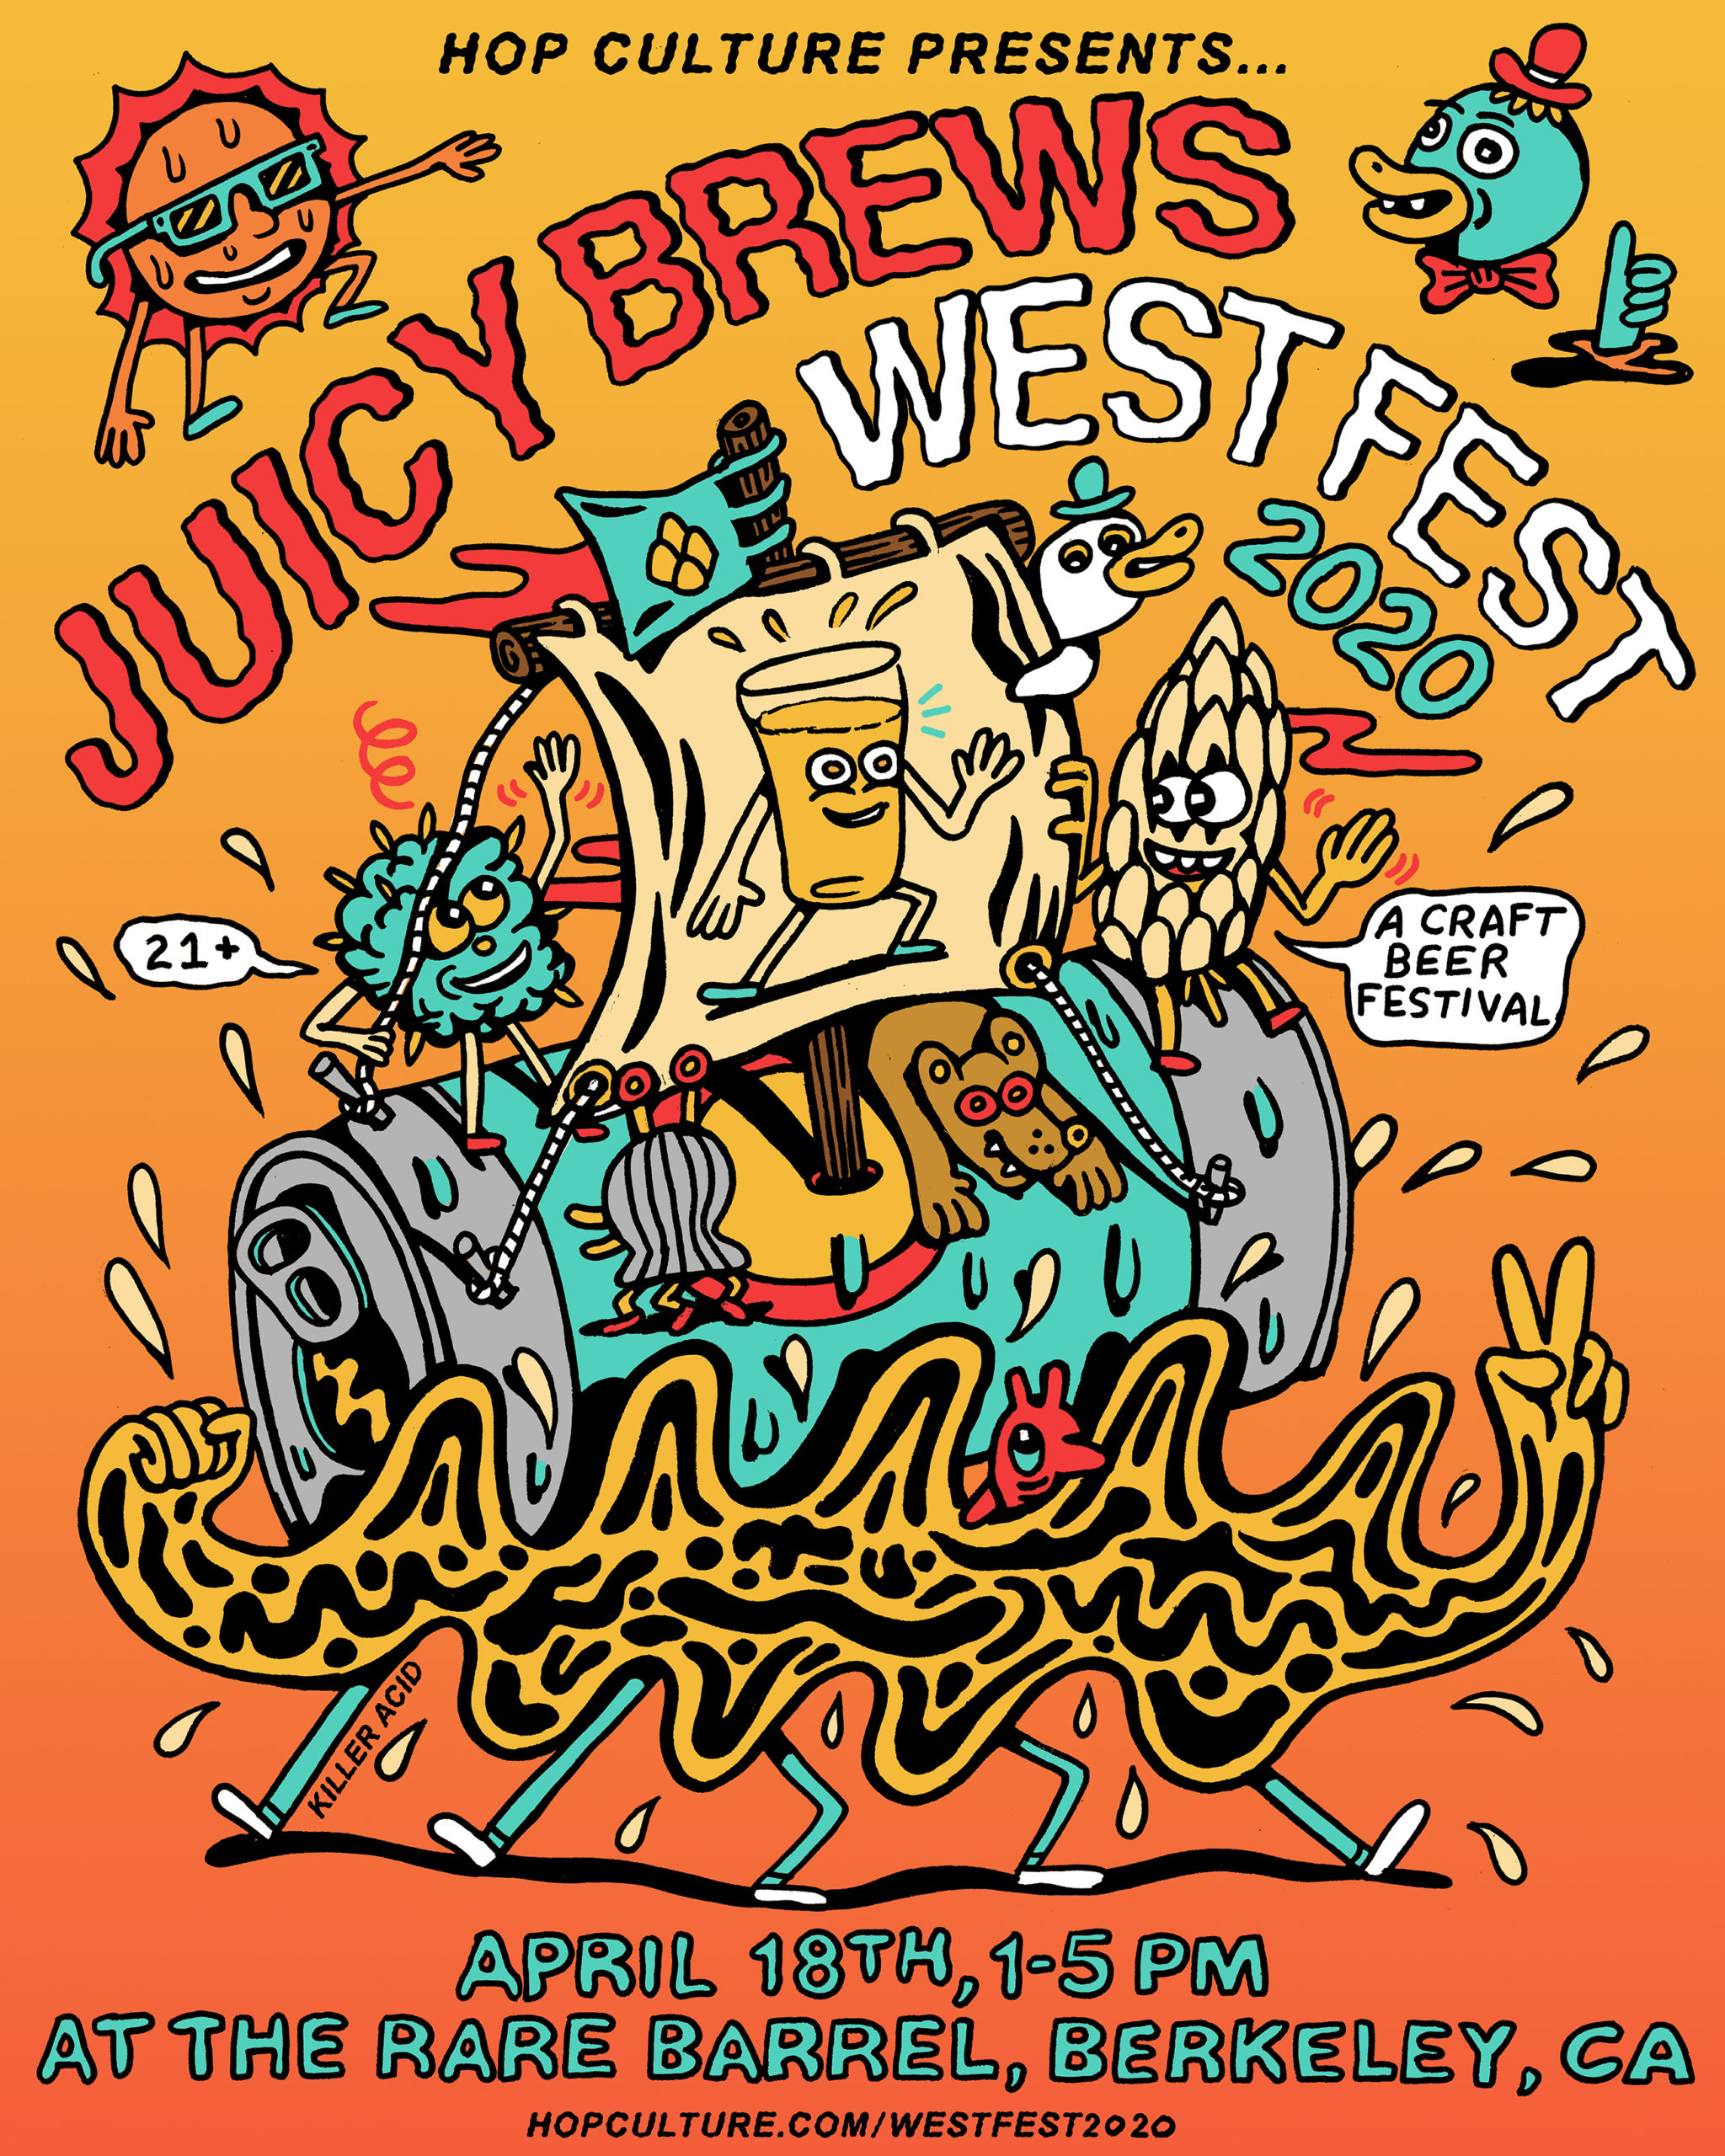 Hop Culture Returns to the Bay Area with Juicy Brews WestFest 2020 ...